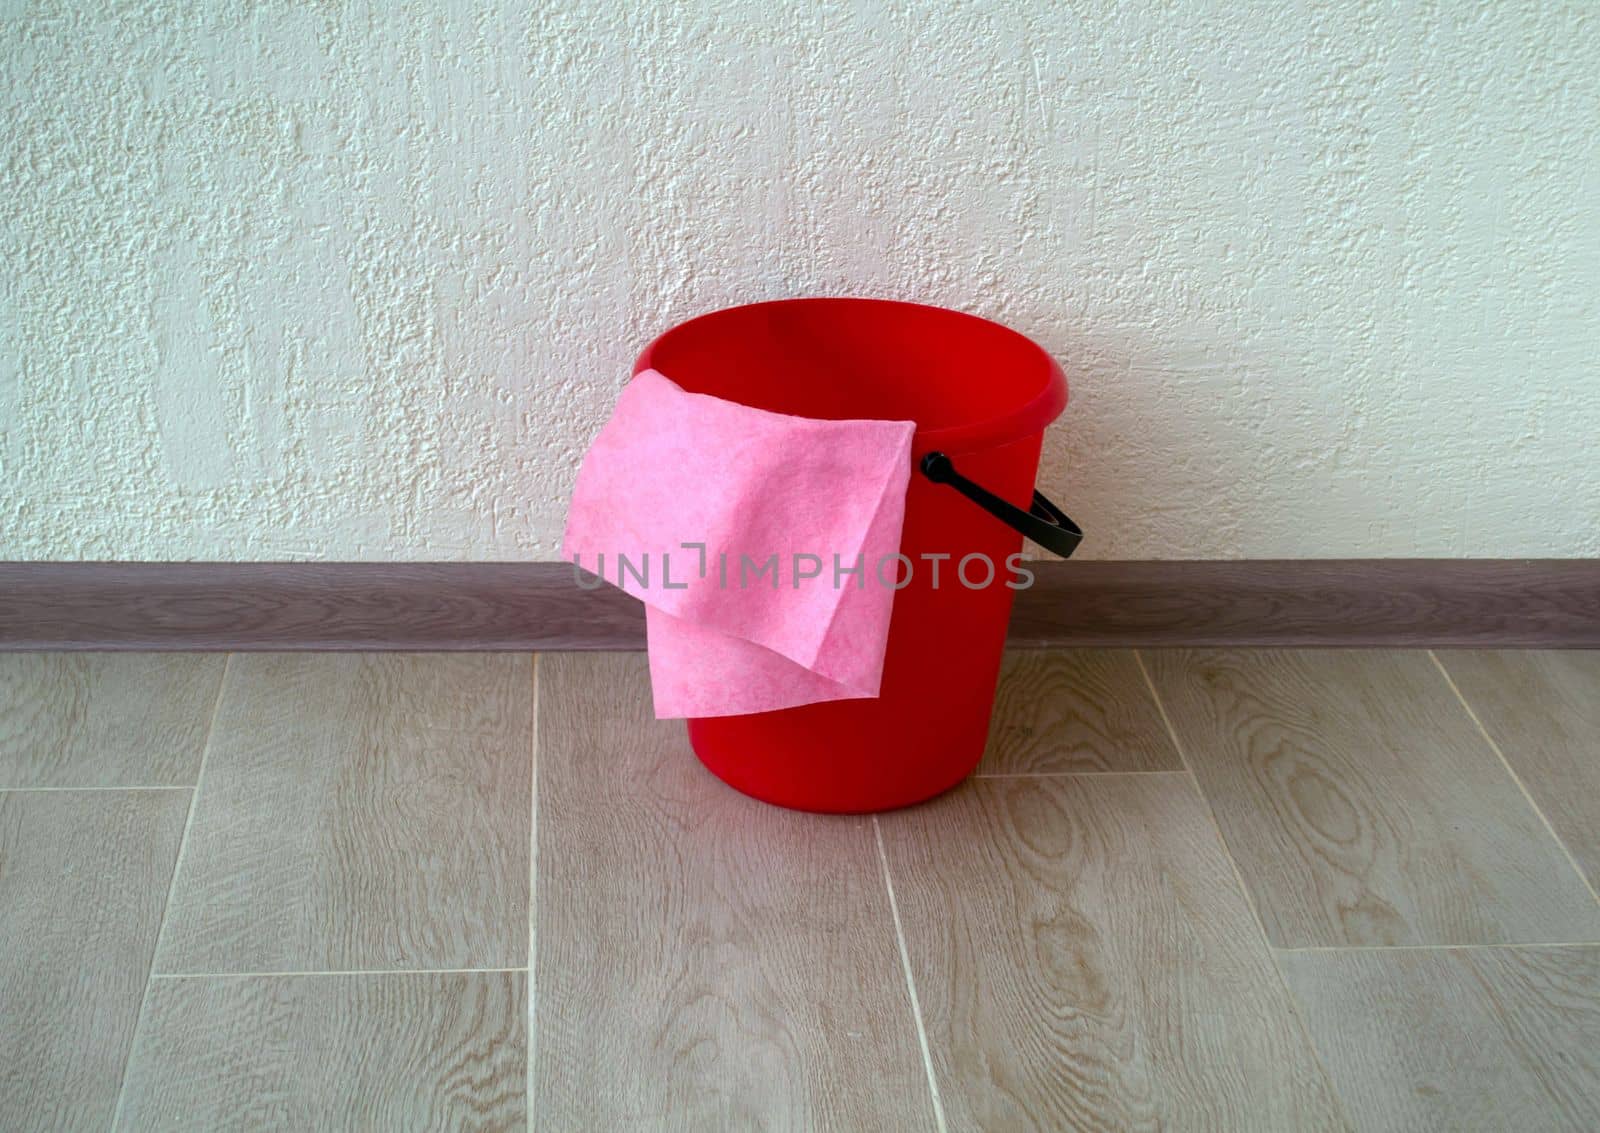 House cleaning. The photo shows a red bucket and a rag.